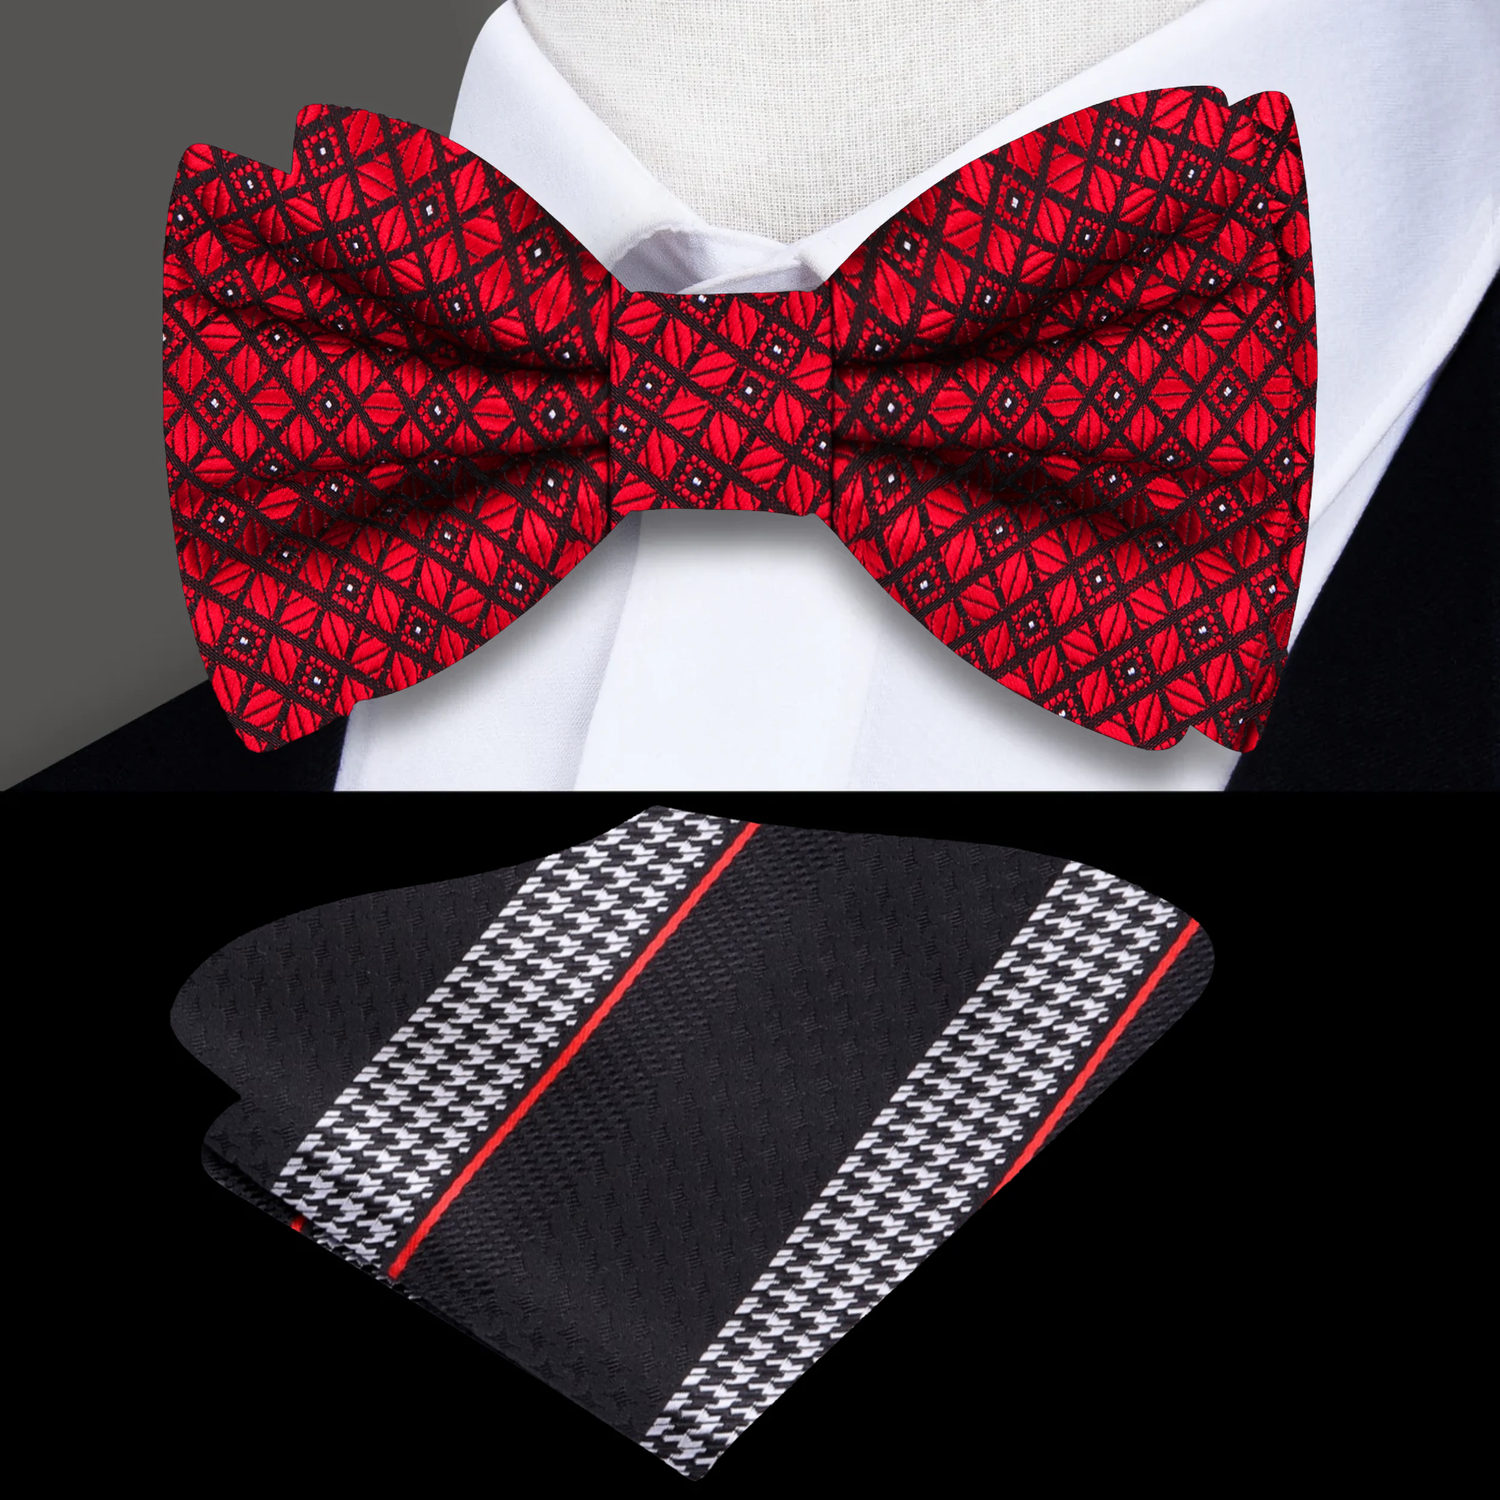 Burgundy Merlot Diamonds Bow Tie and Accenting Pocket Square